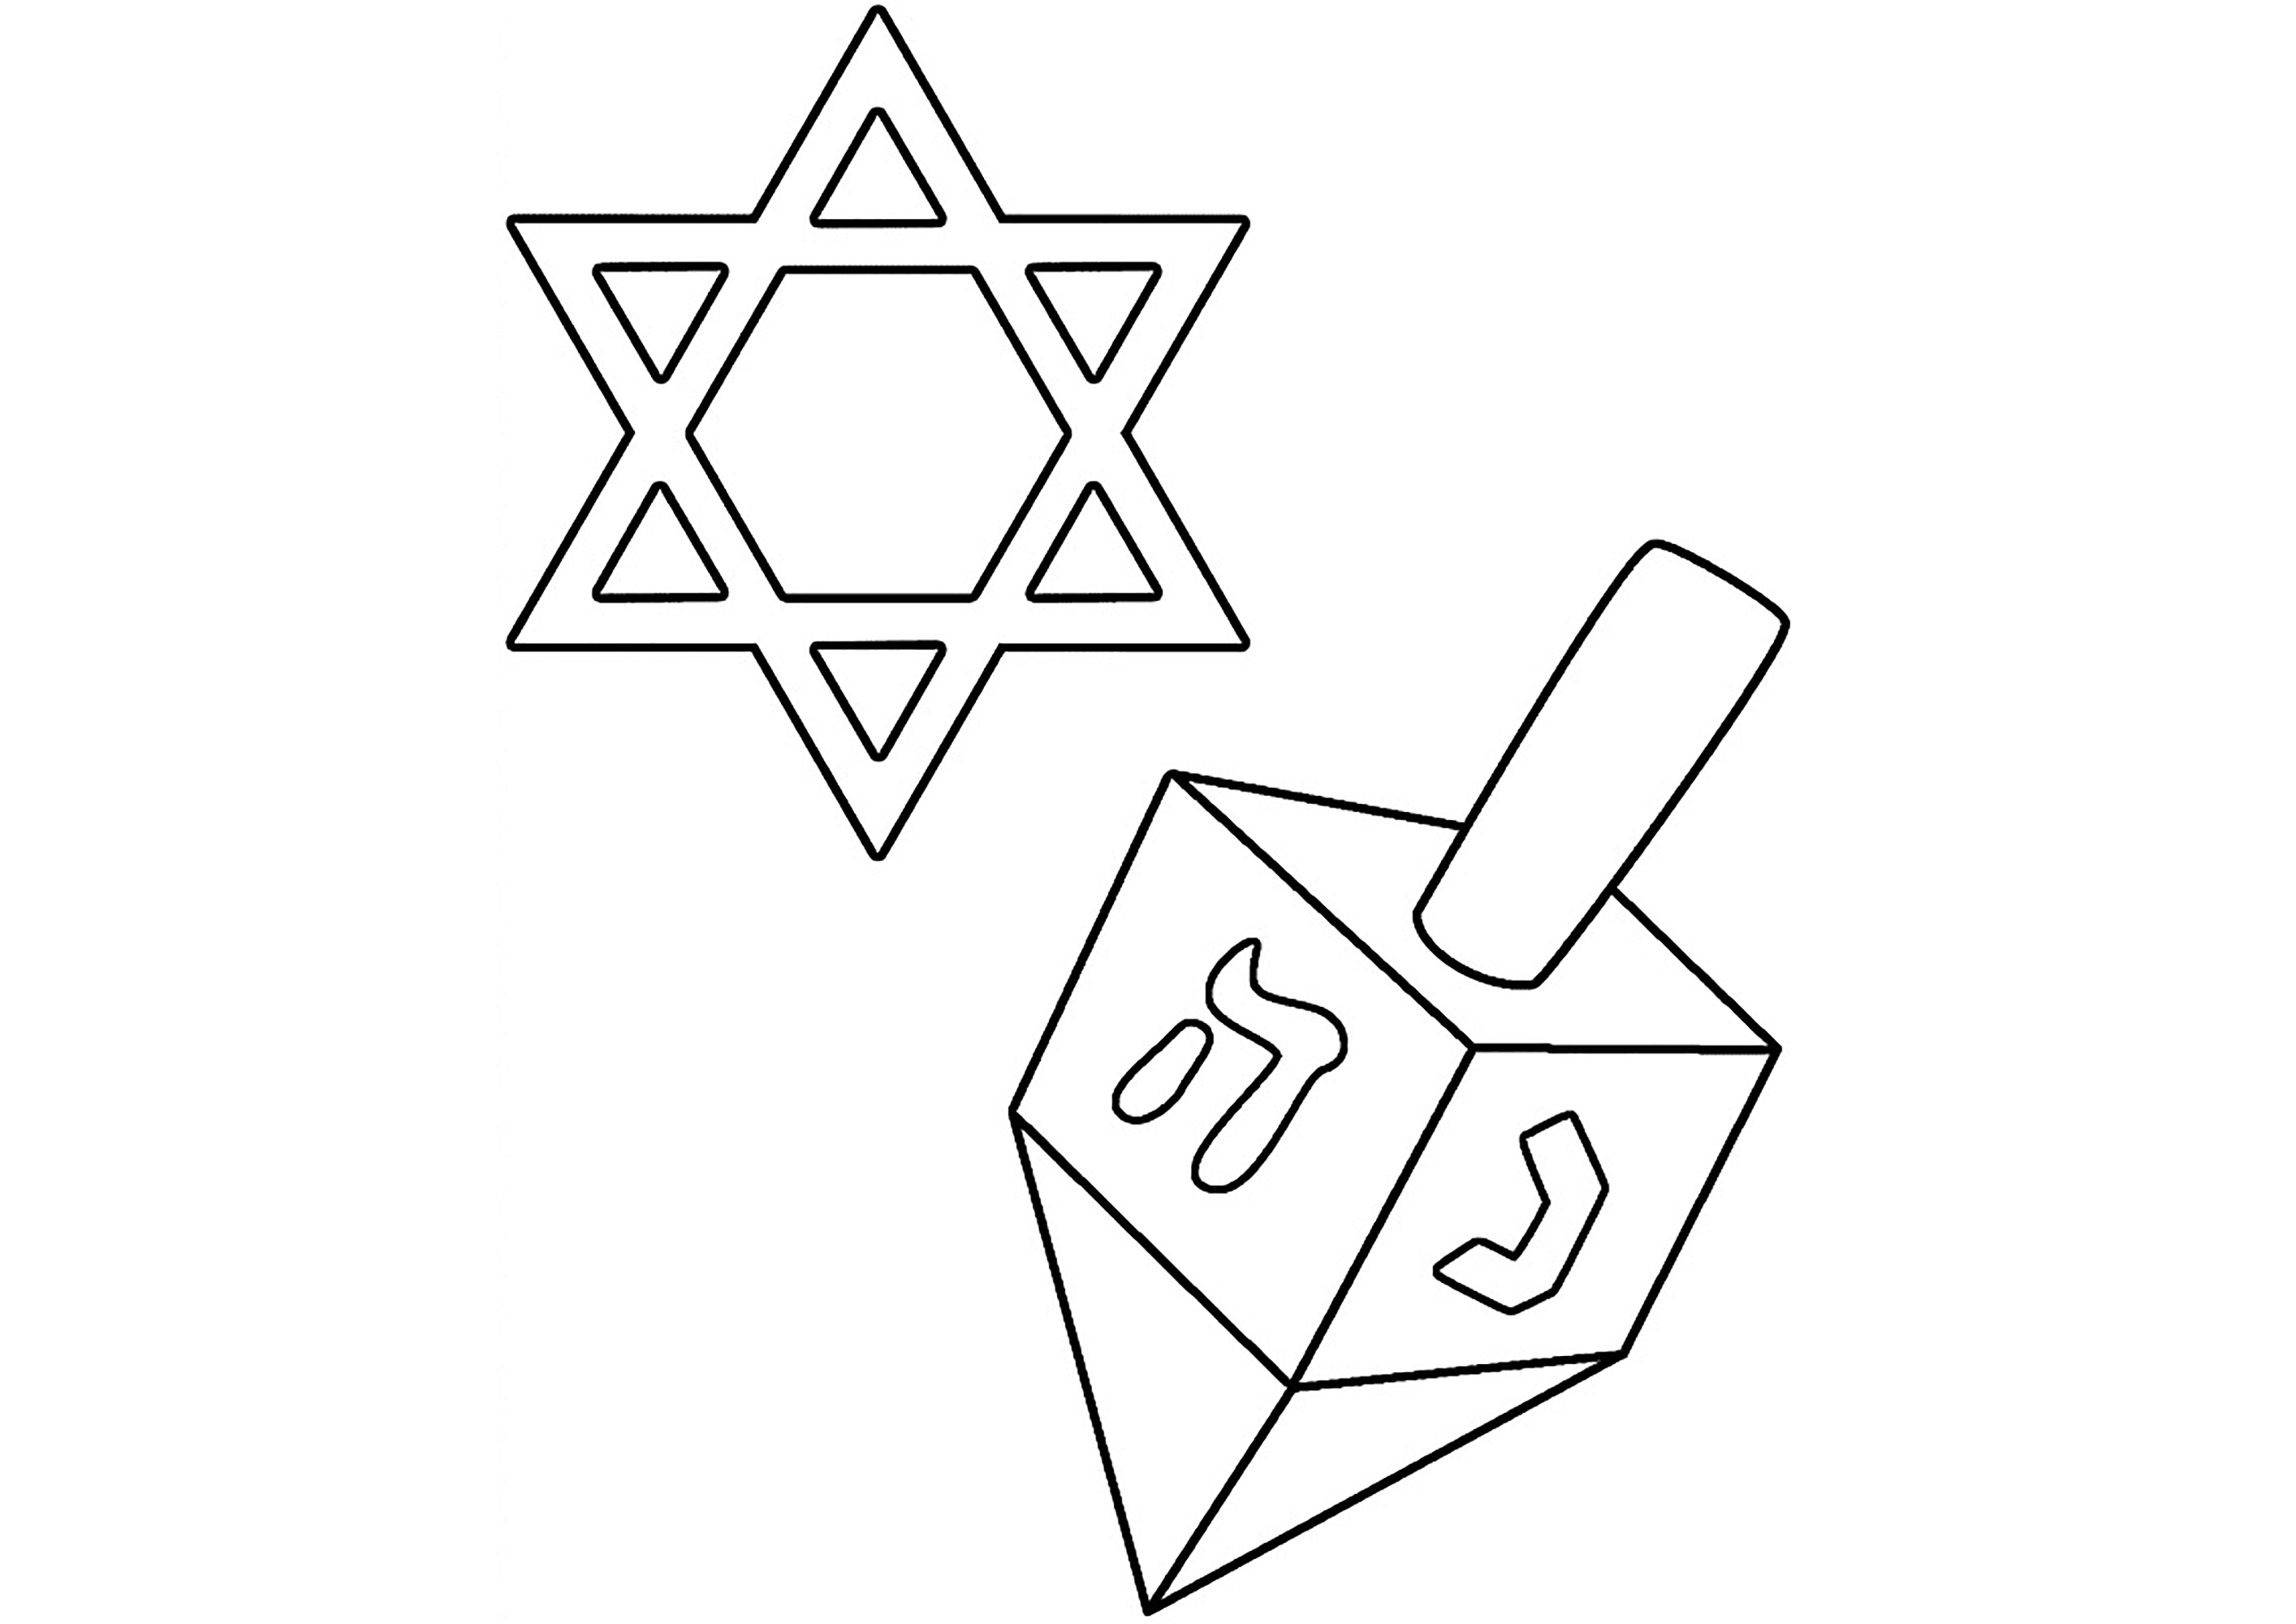 Hanukkah spinning top and Star of David. Two symbols of Judaism